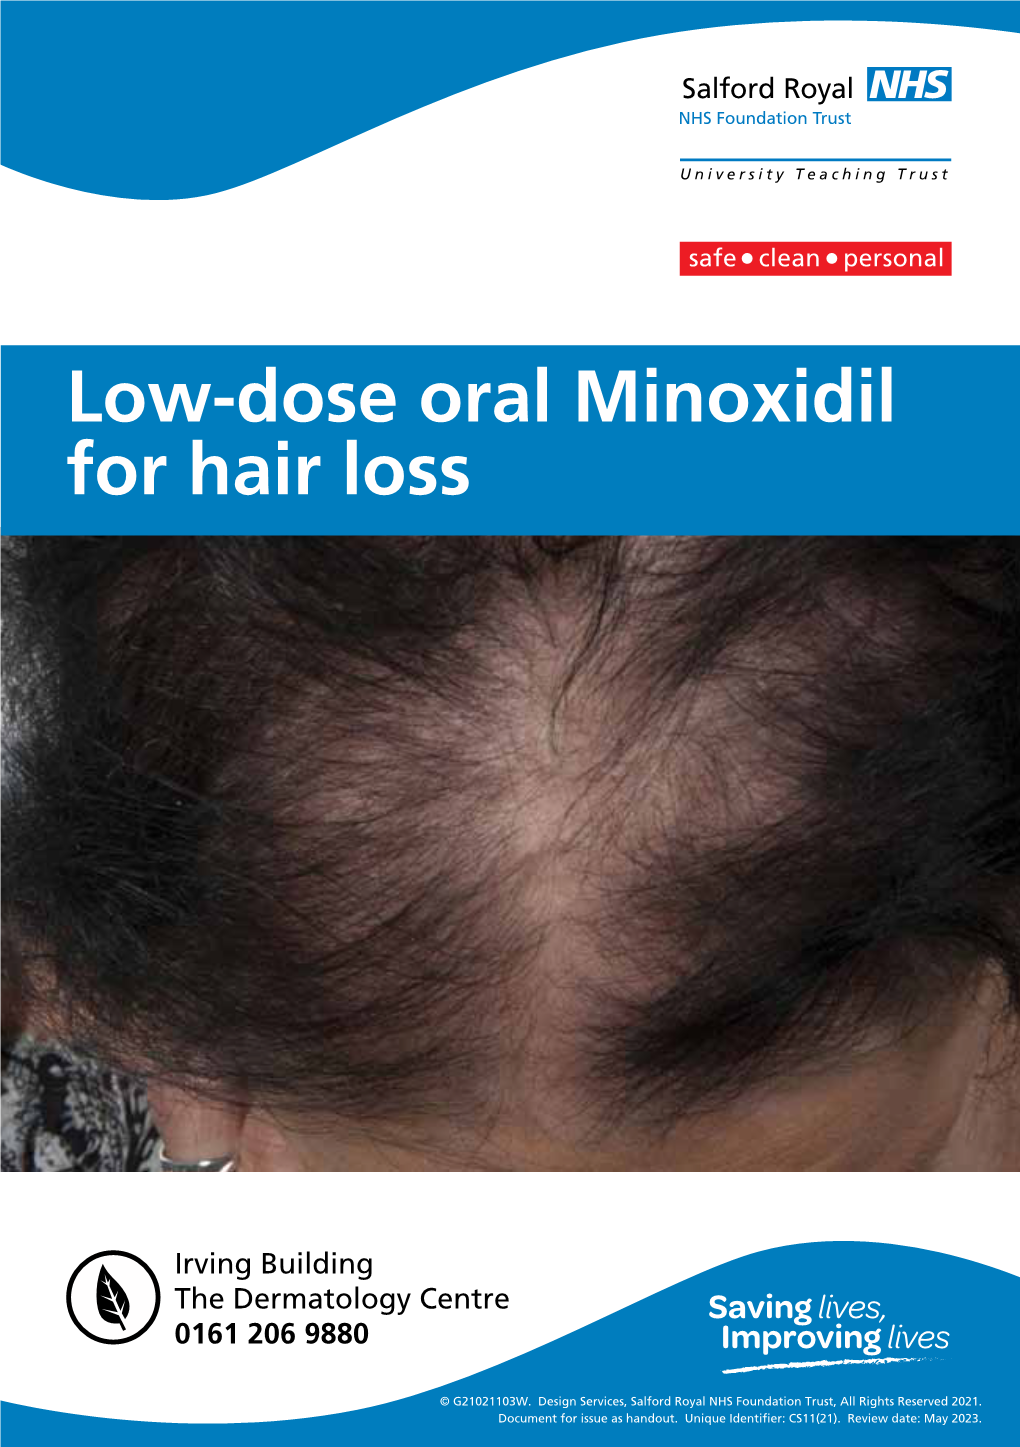 Low-Dose Oral Minoxidil for Hair Loss